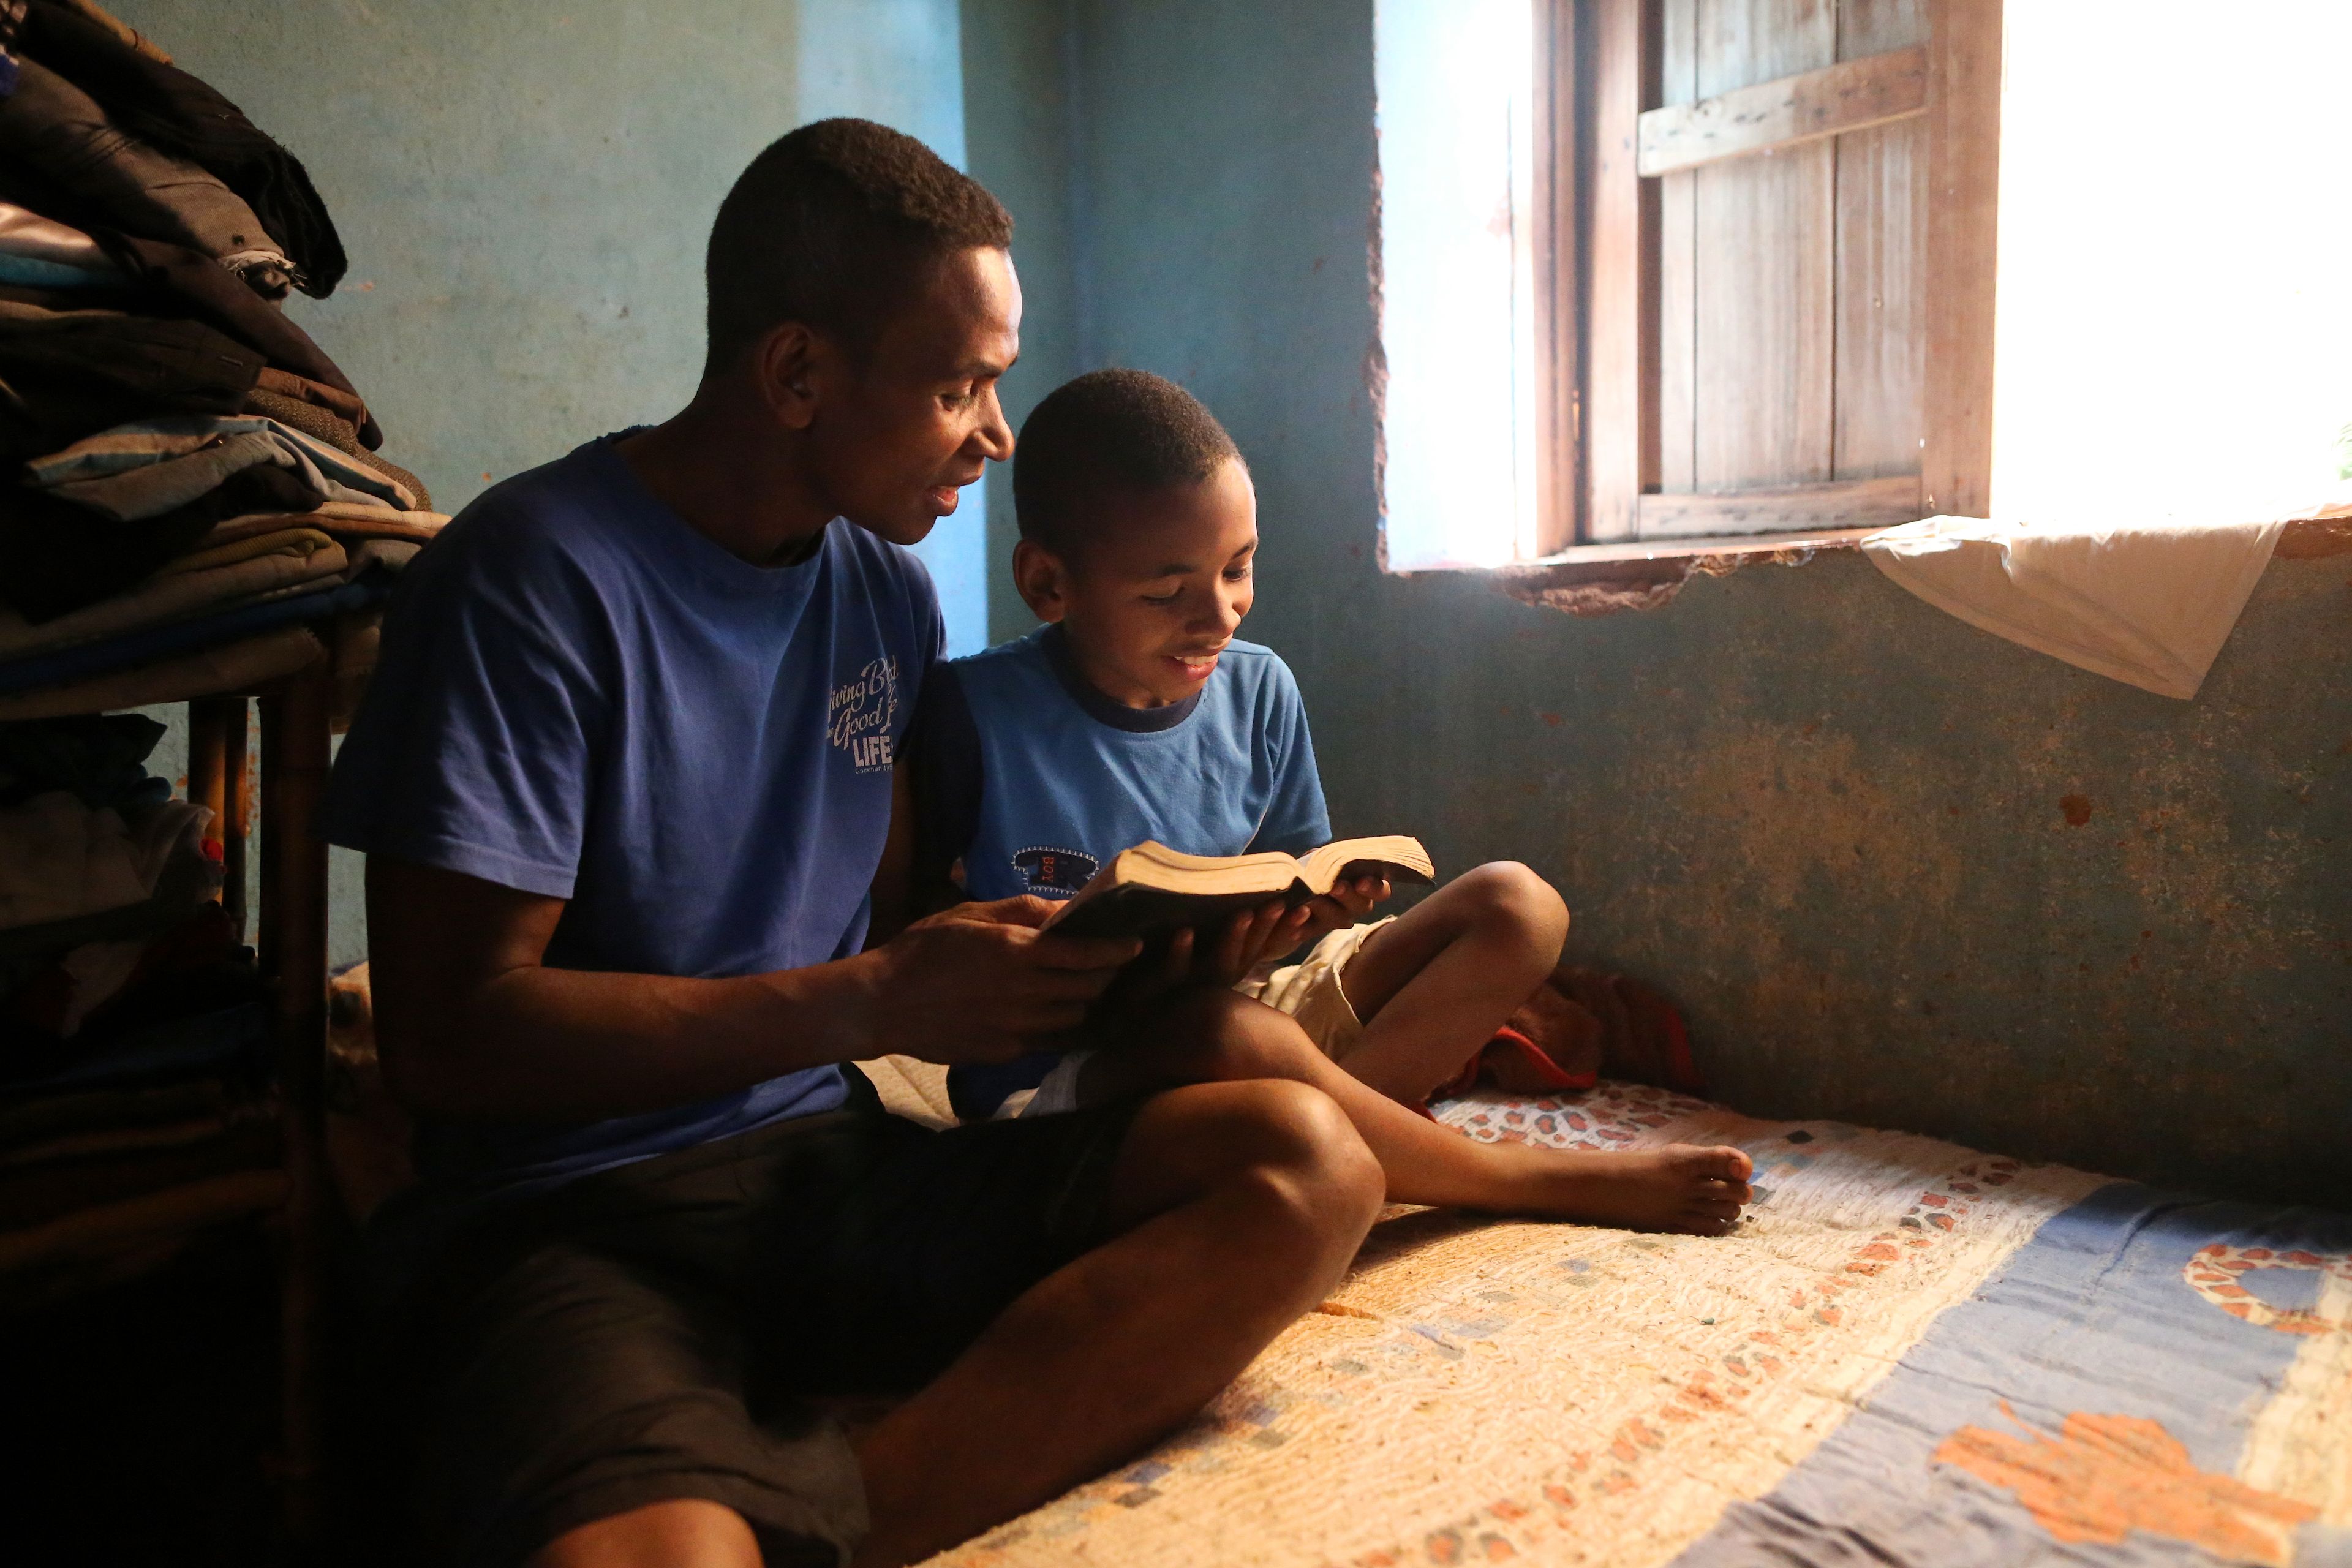 A father reading scriptures with his son.